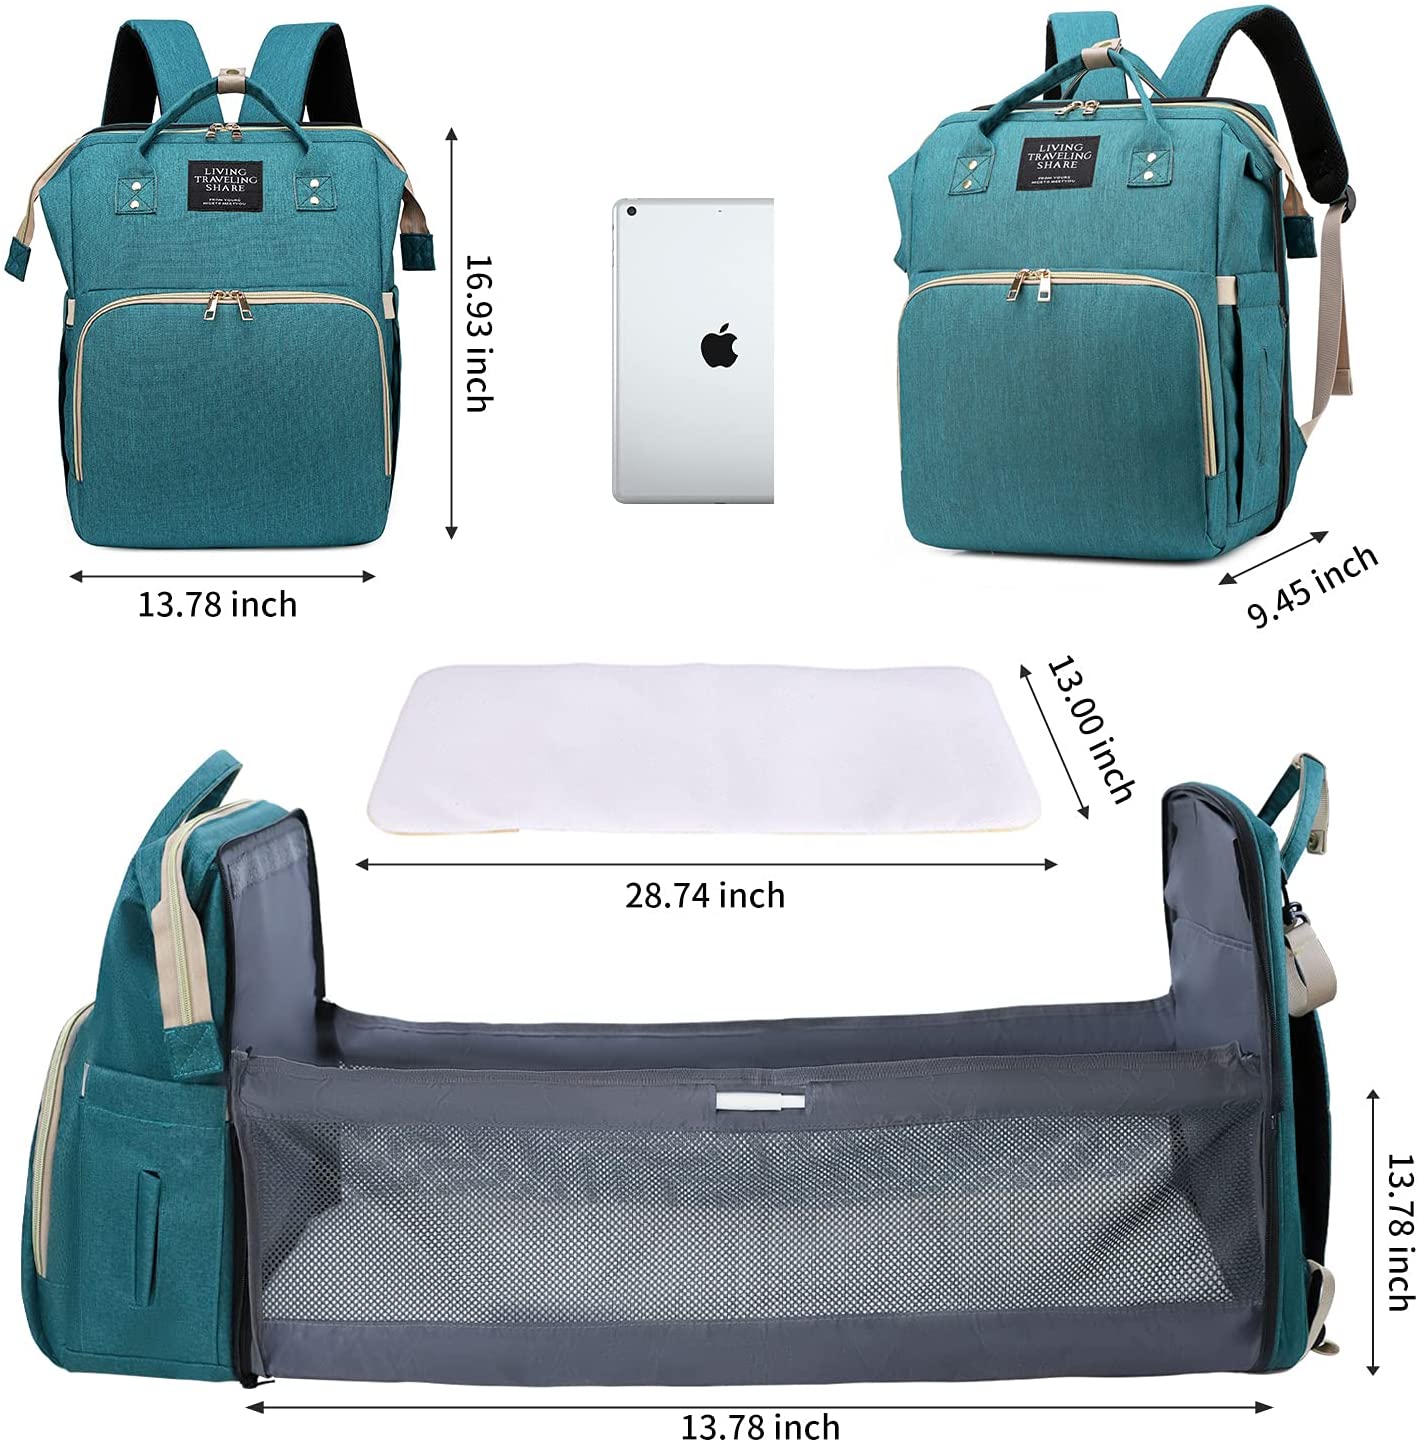 Imported Multifunctional Portable Folding Diaper Bag and Portable Baby Bed Large Backpack